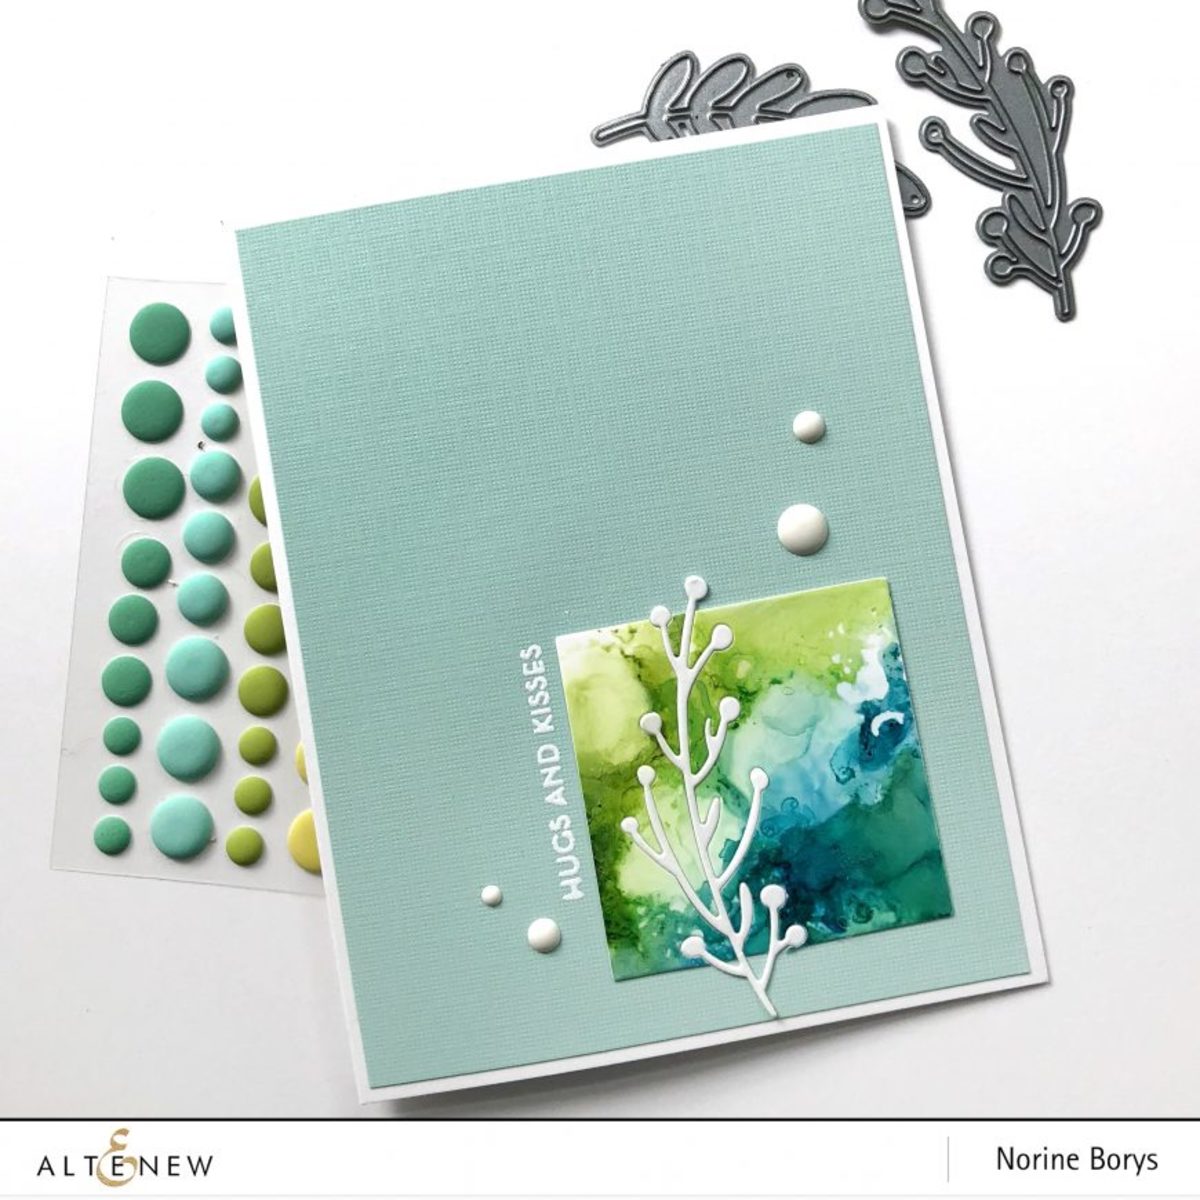 You cam use your left over alcohol ink paper to create lovely colorful cards